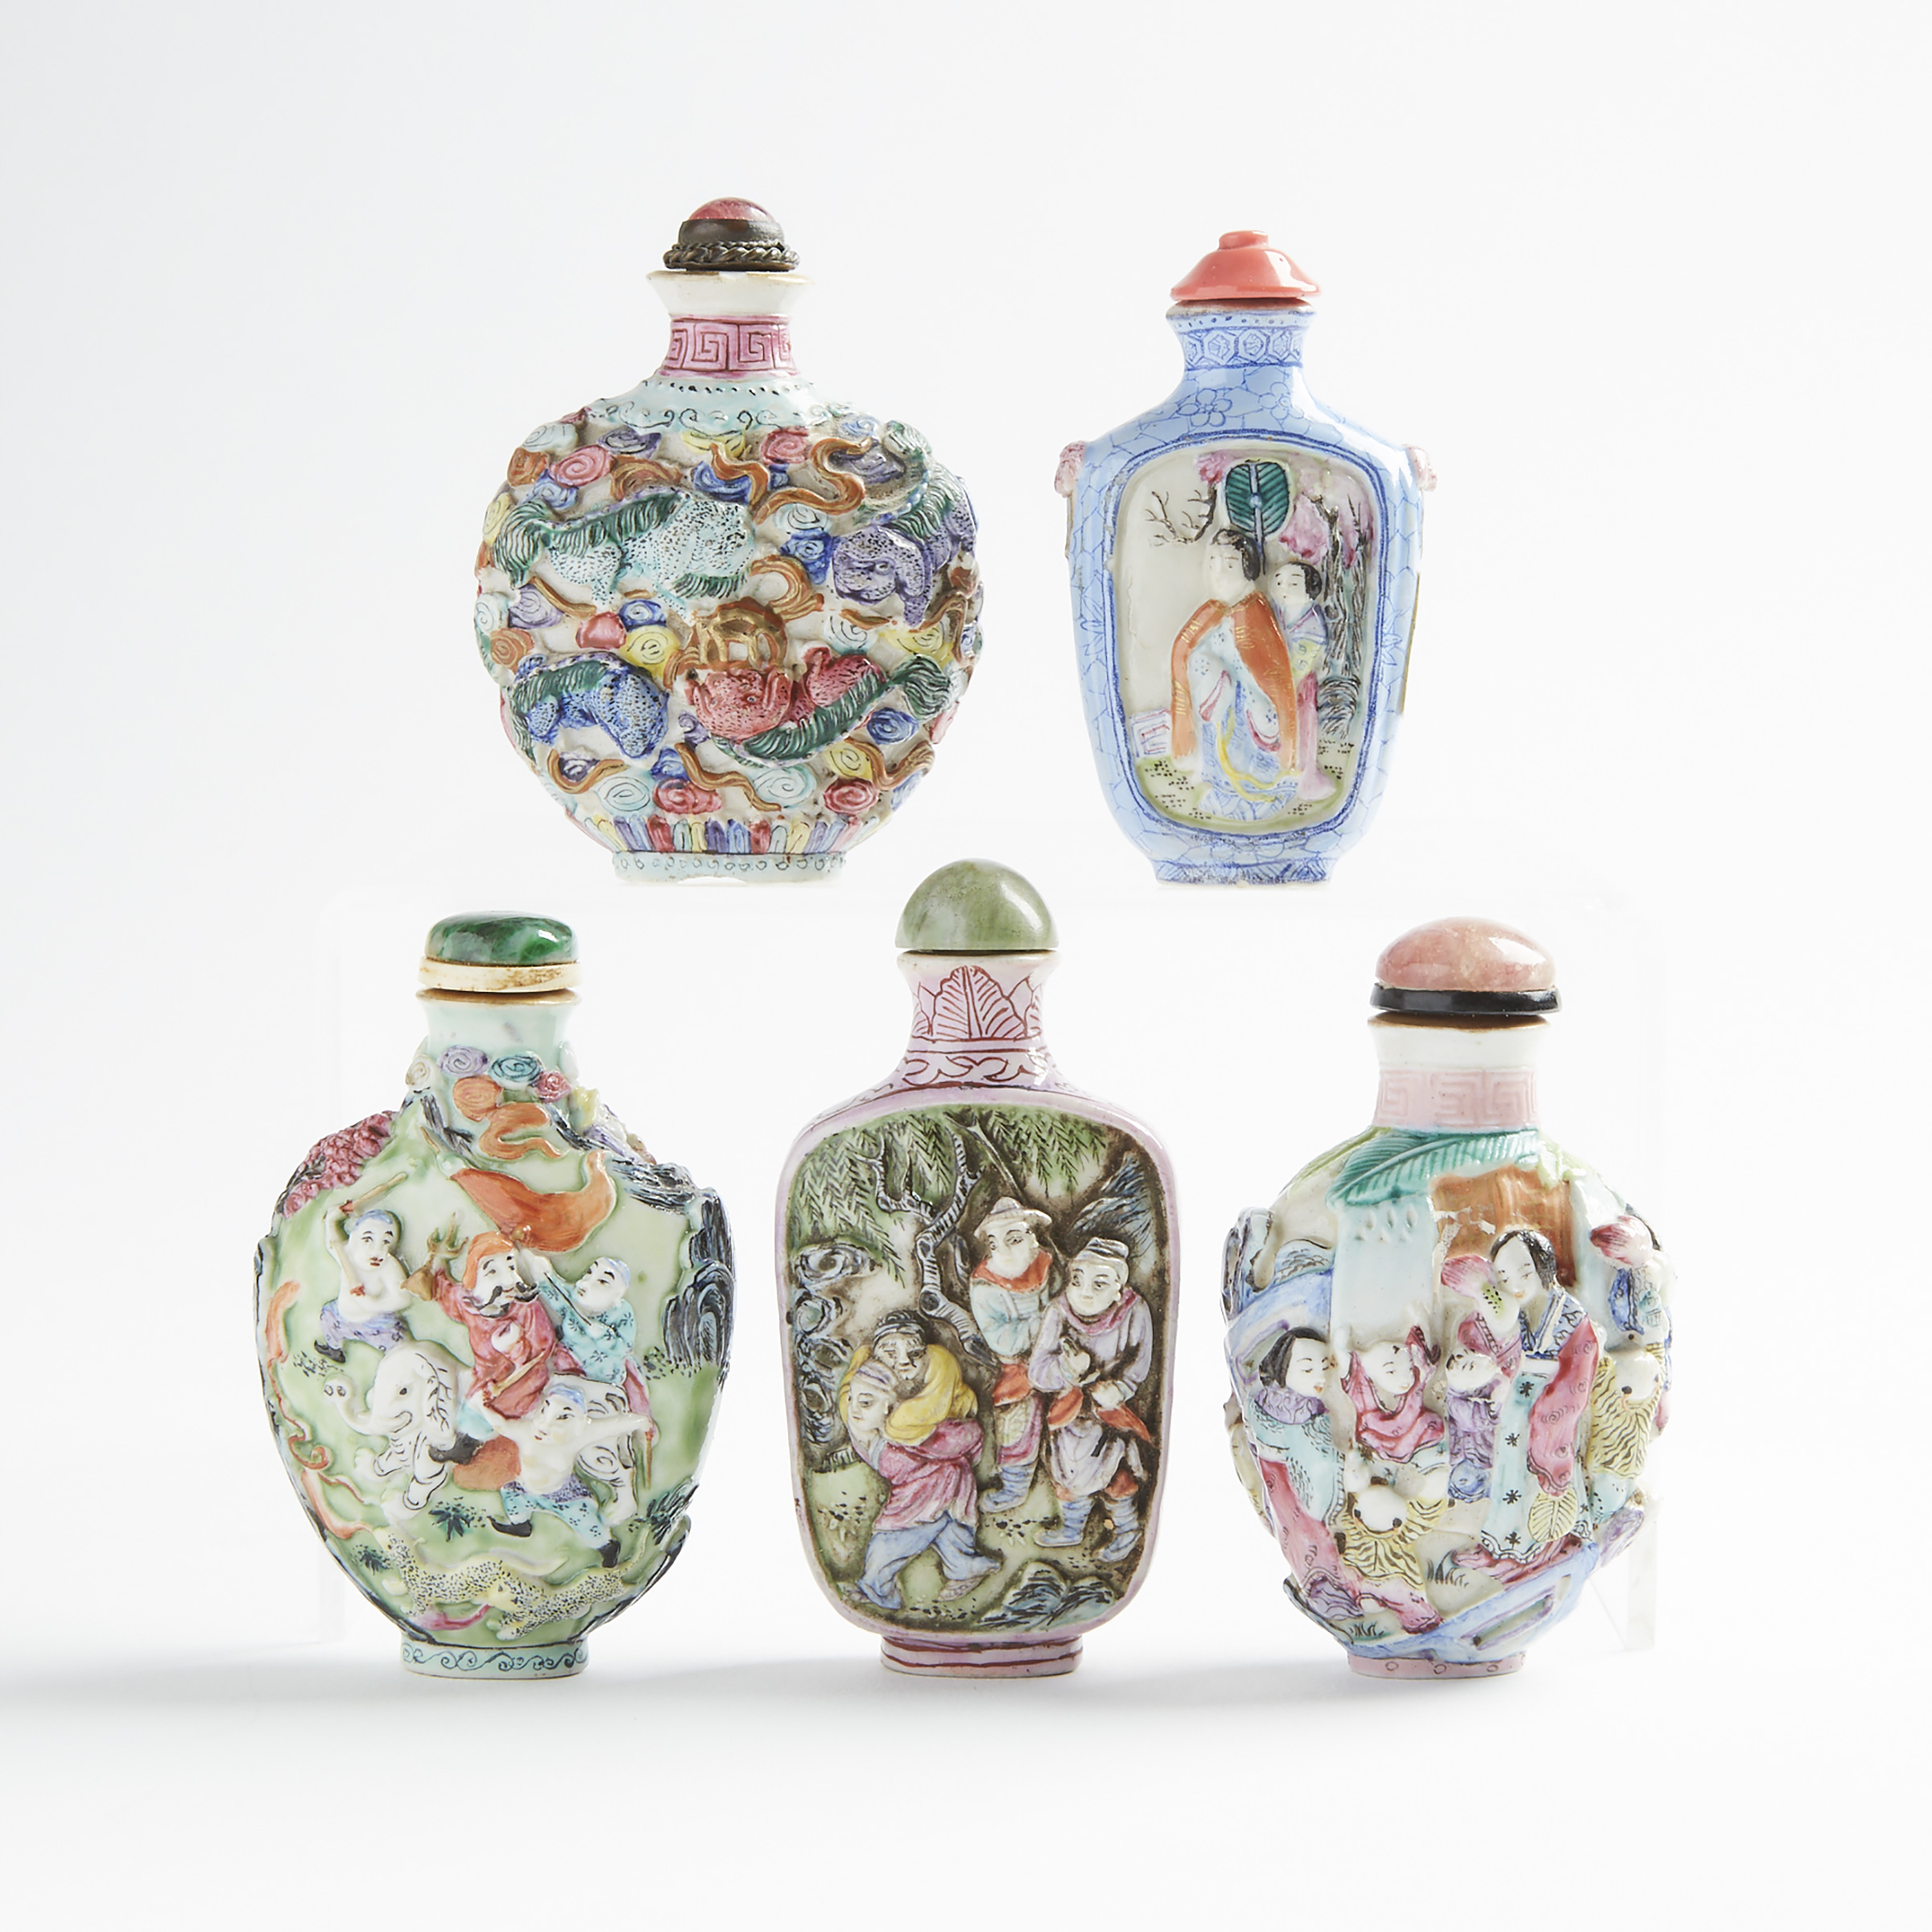 A Group of Five Famille Rose Moulded Snuff Bottles, 19th/Early 20th Century